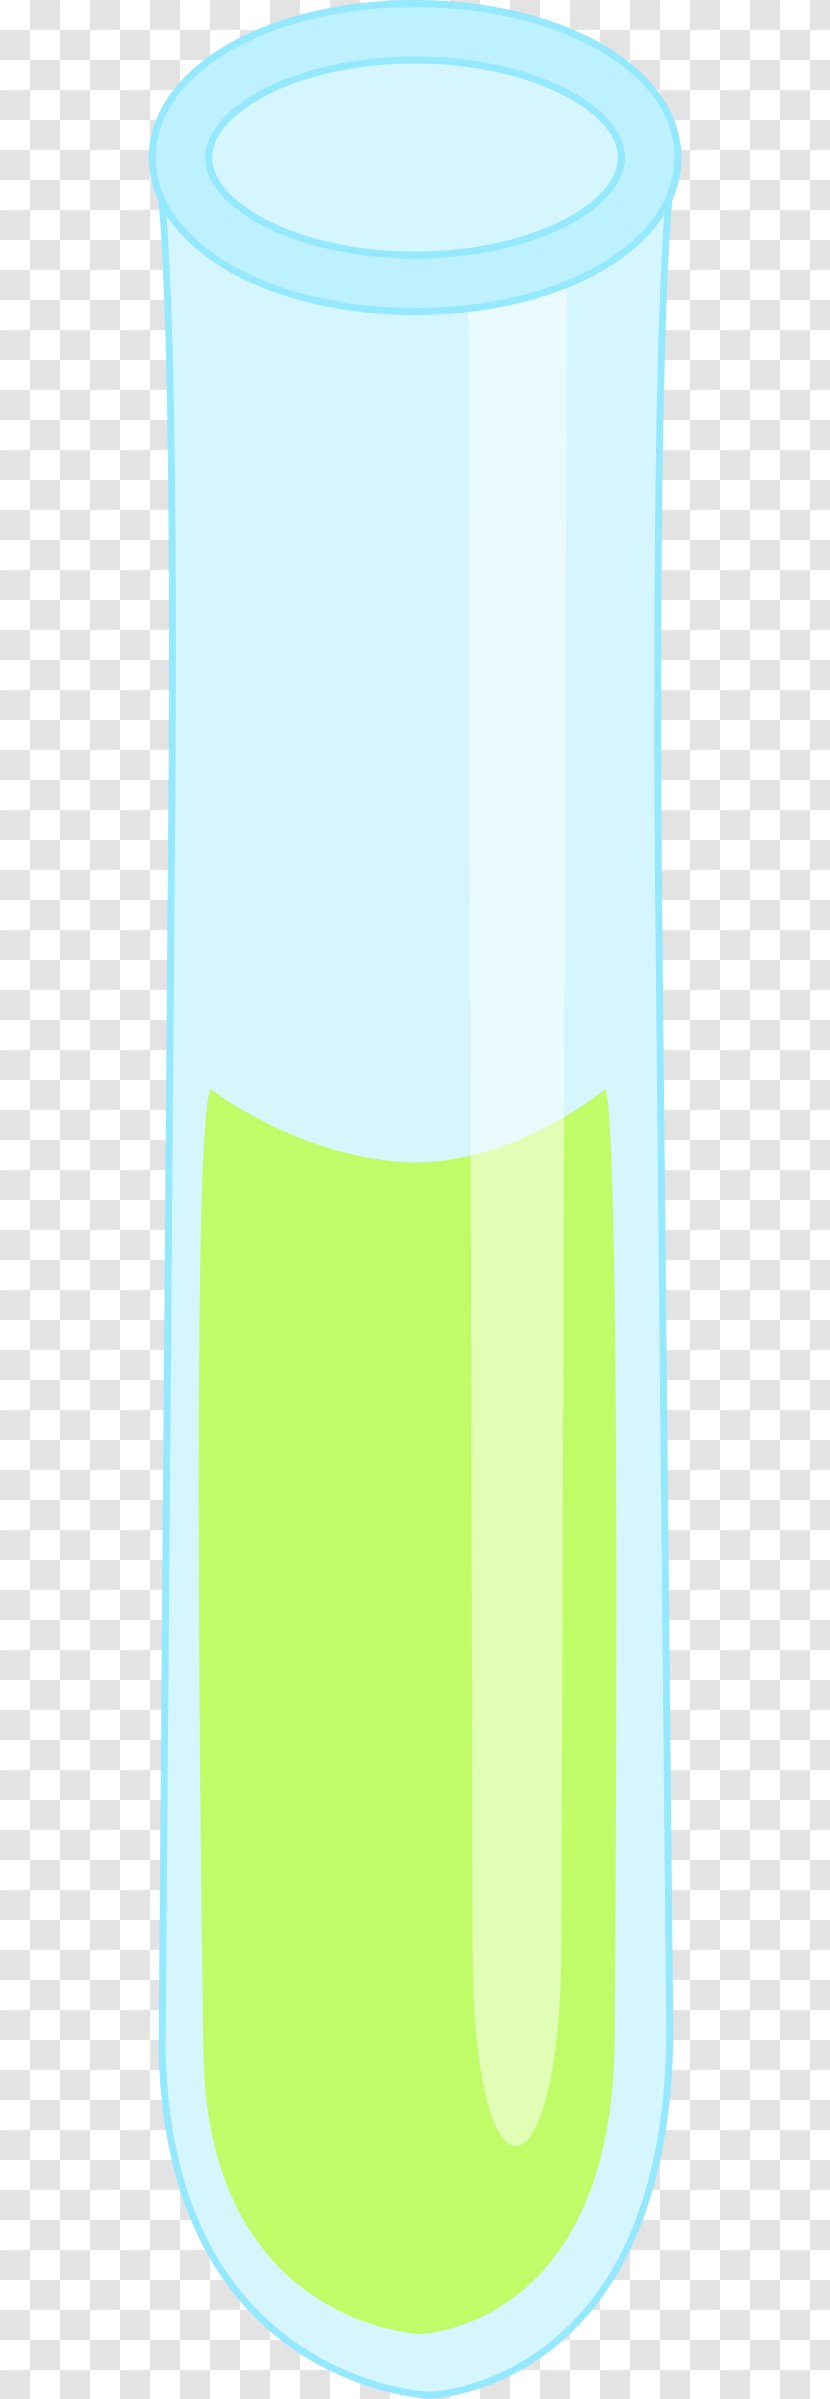 Yellow Test Tubes Liquid Erlenmeyer Flask Transparent PNG